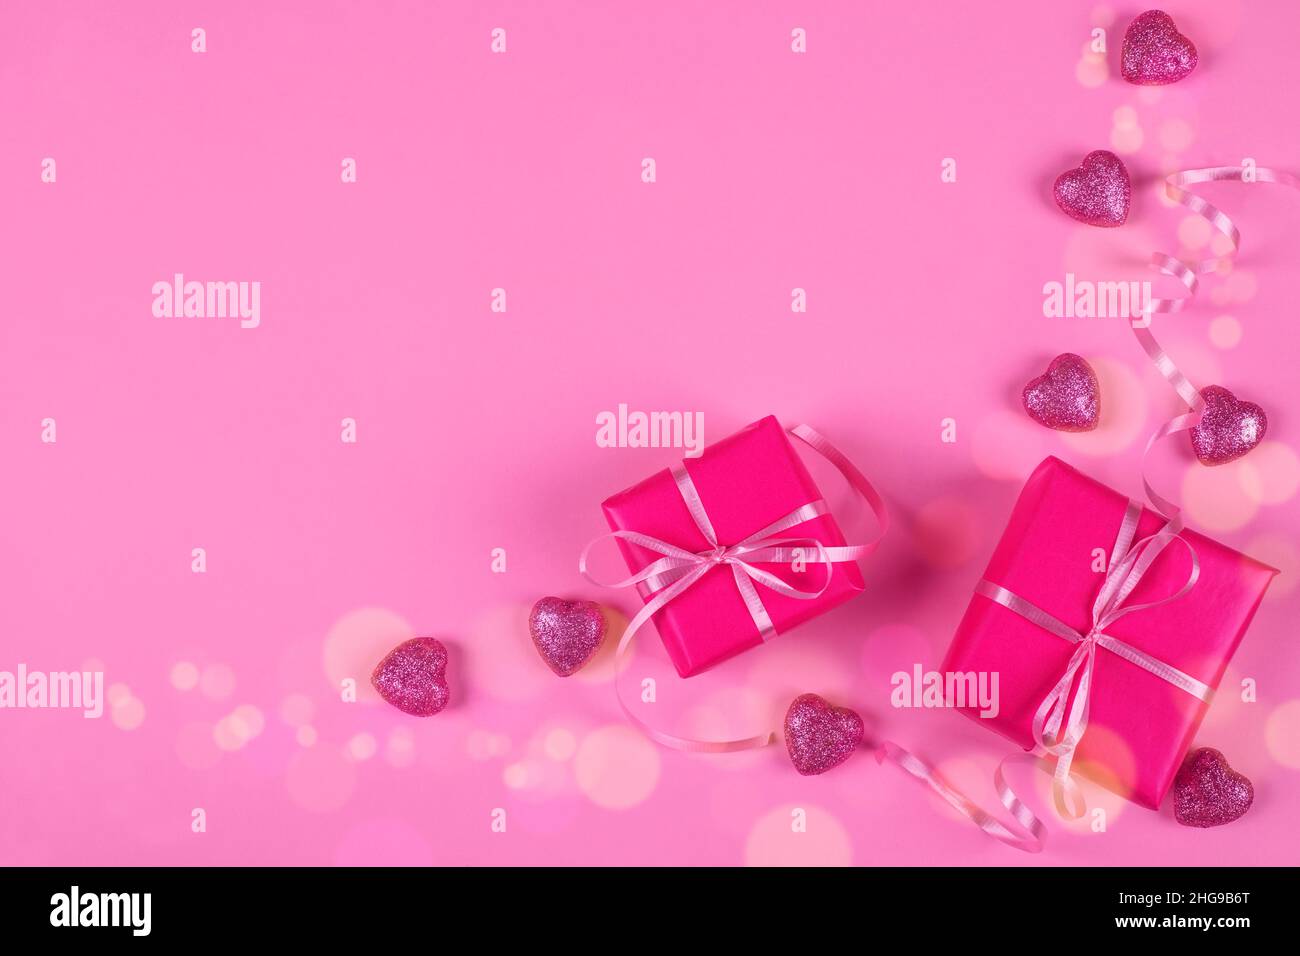 Overhead view of wrapped gift boxes with heart shaped ornaments on a pink background Stock Photo